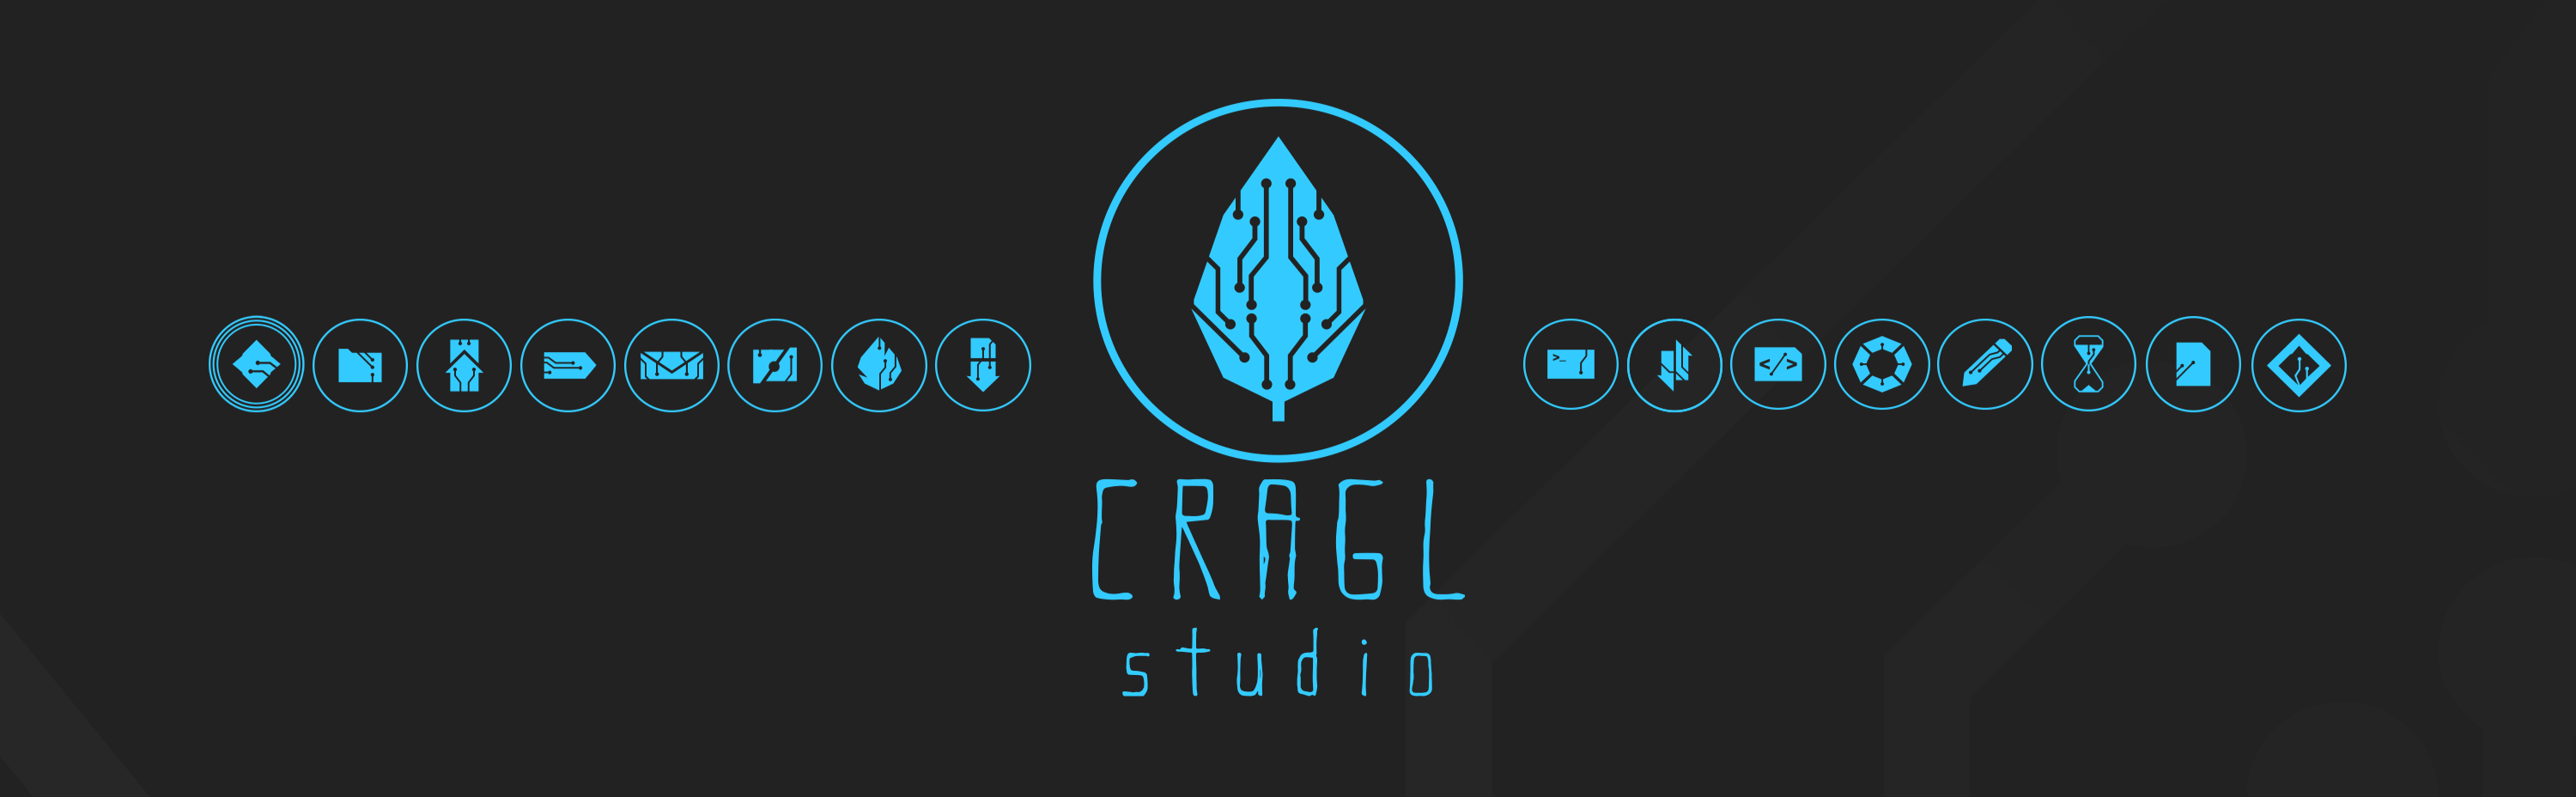 cragl studio - accell ALL cragl tools with one license